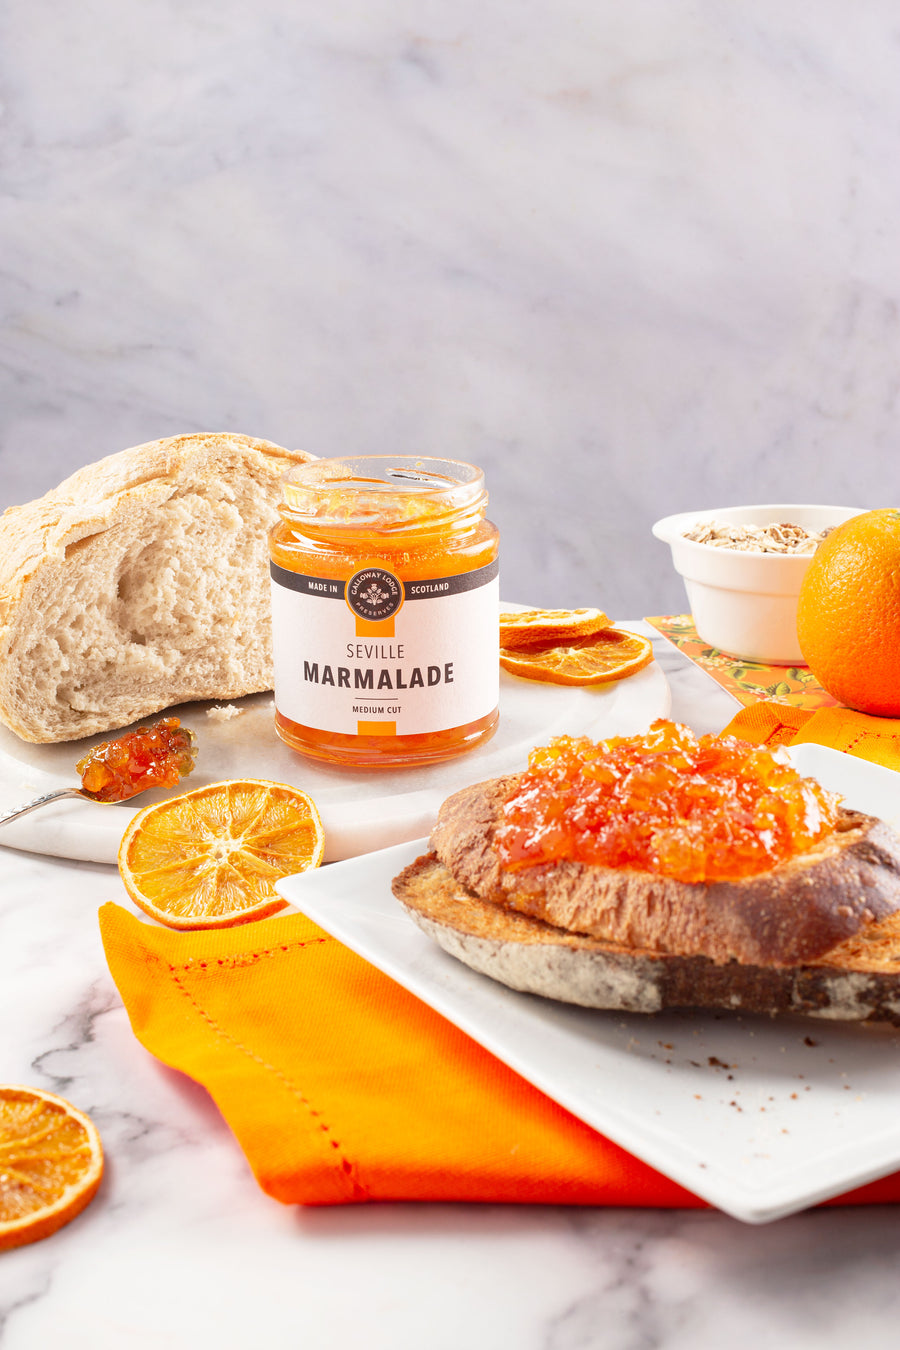 Our fabulous Seville Marmalade served on toast. 